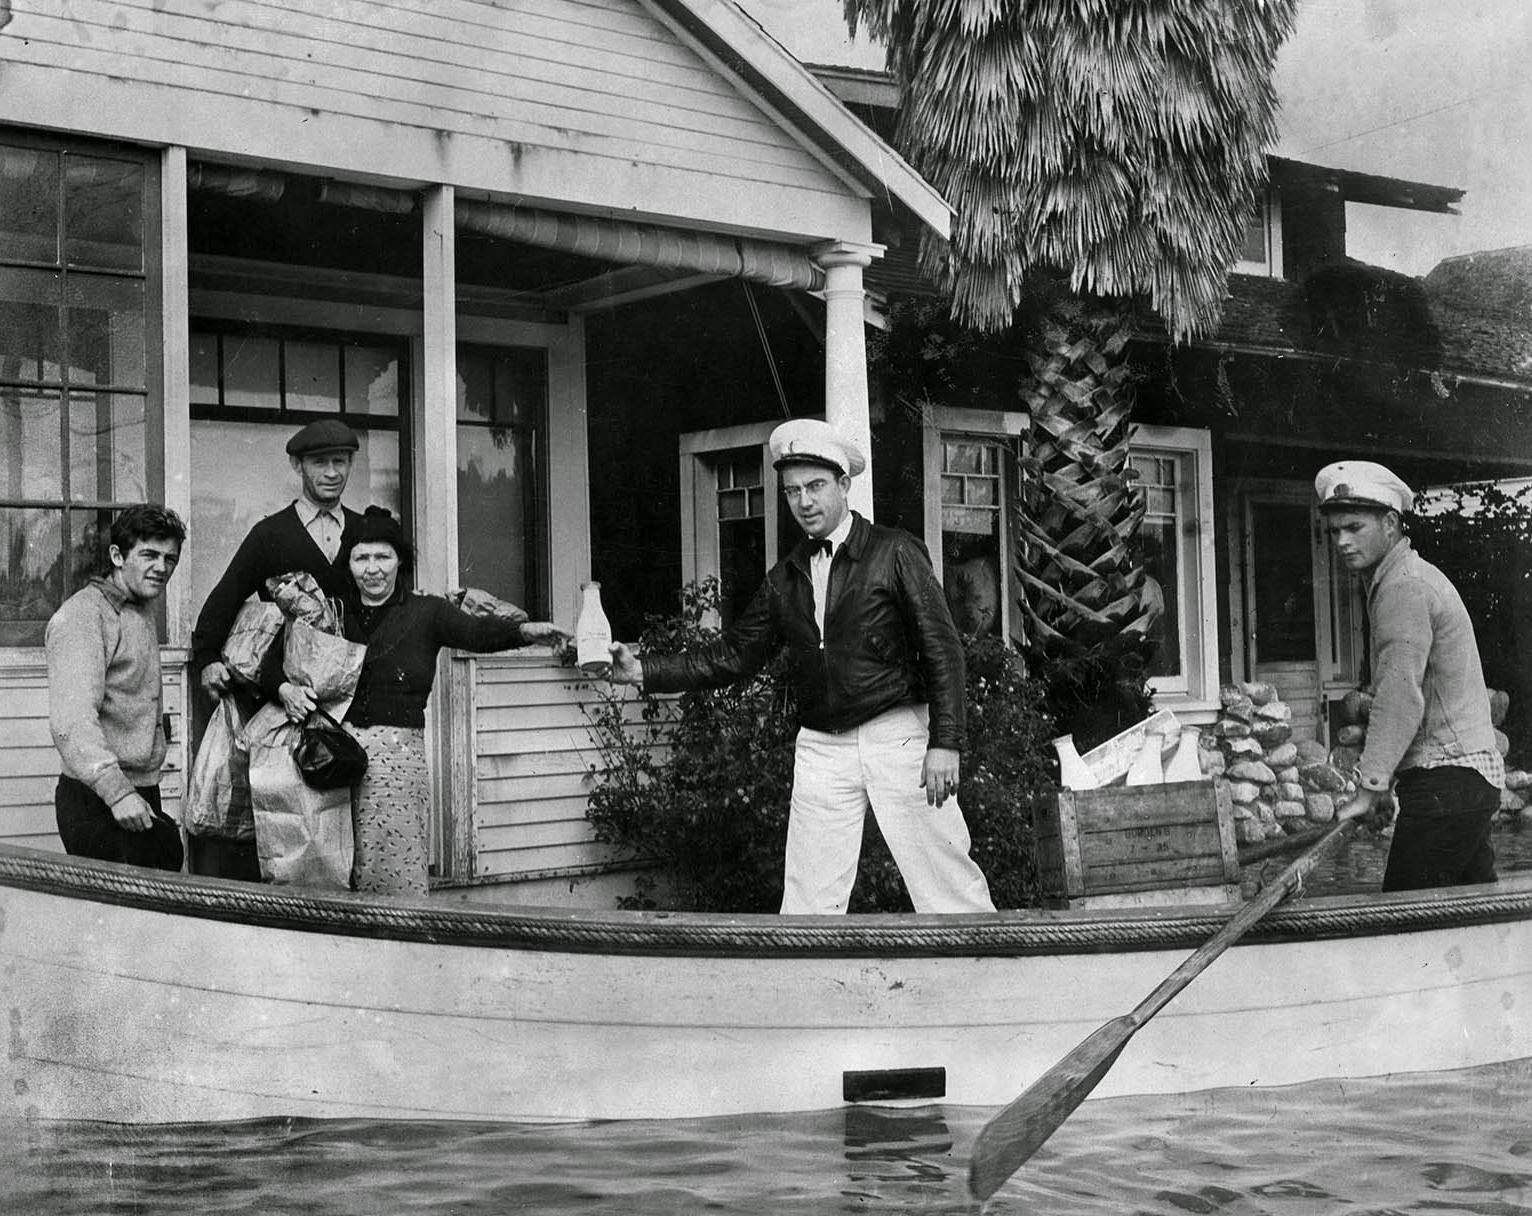 Milkman Ray J. Henville secured himself a boat and boatman and made all deliveries on time and on doorstep, 1938